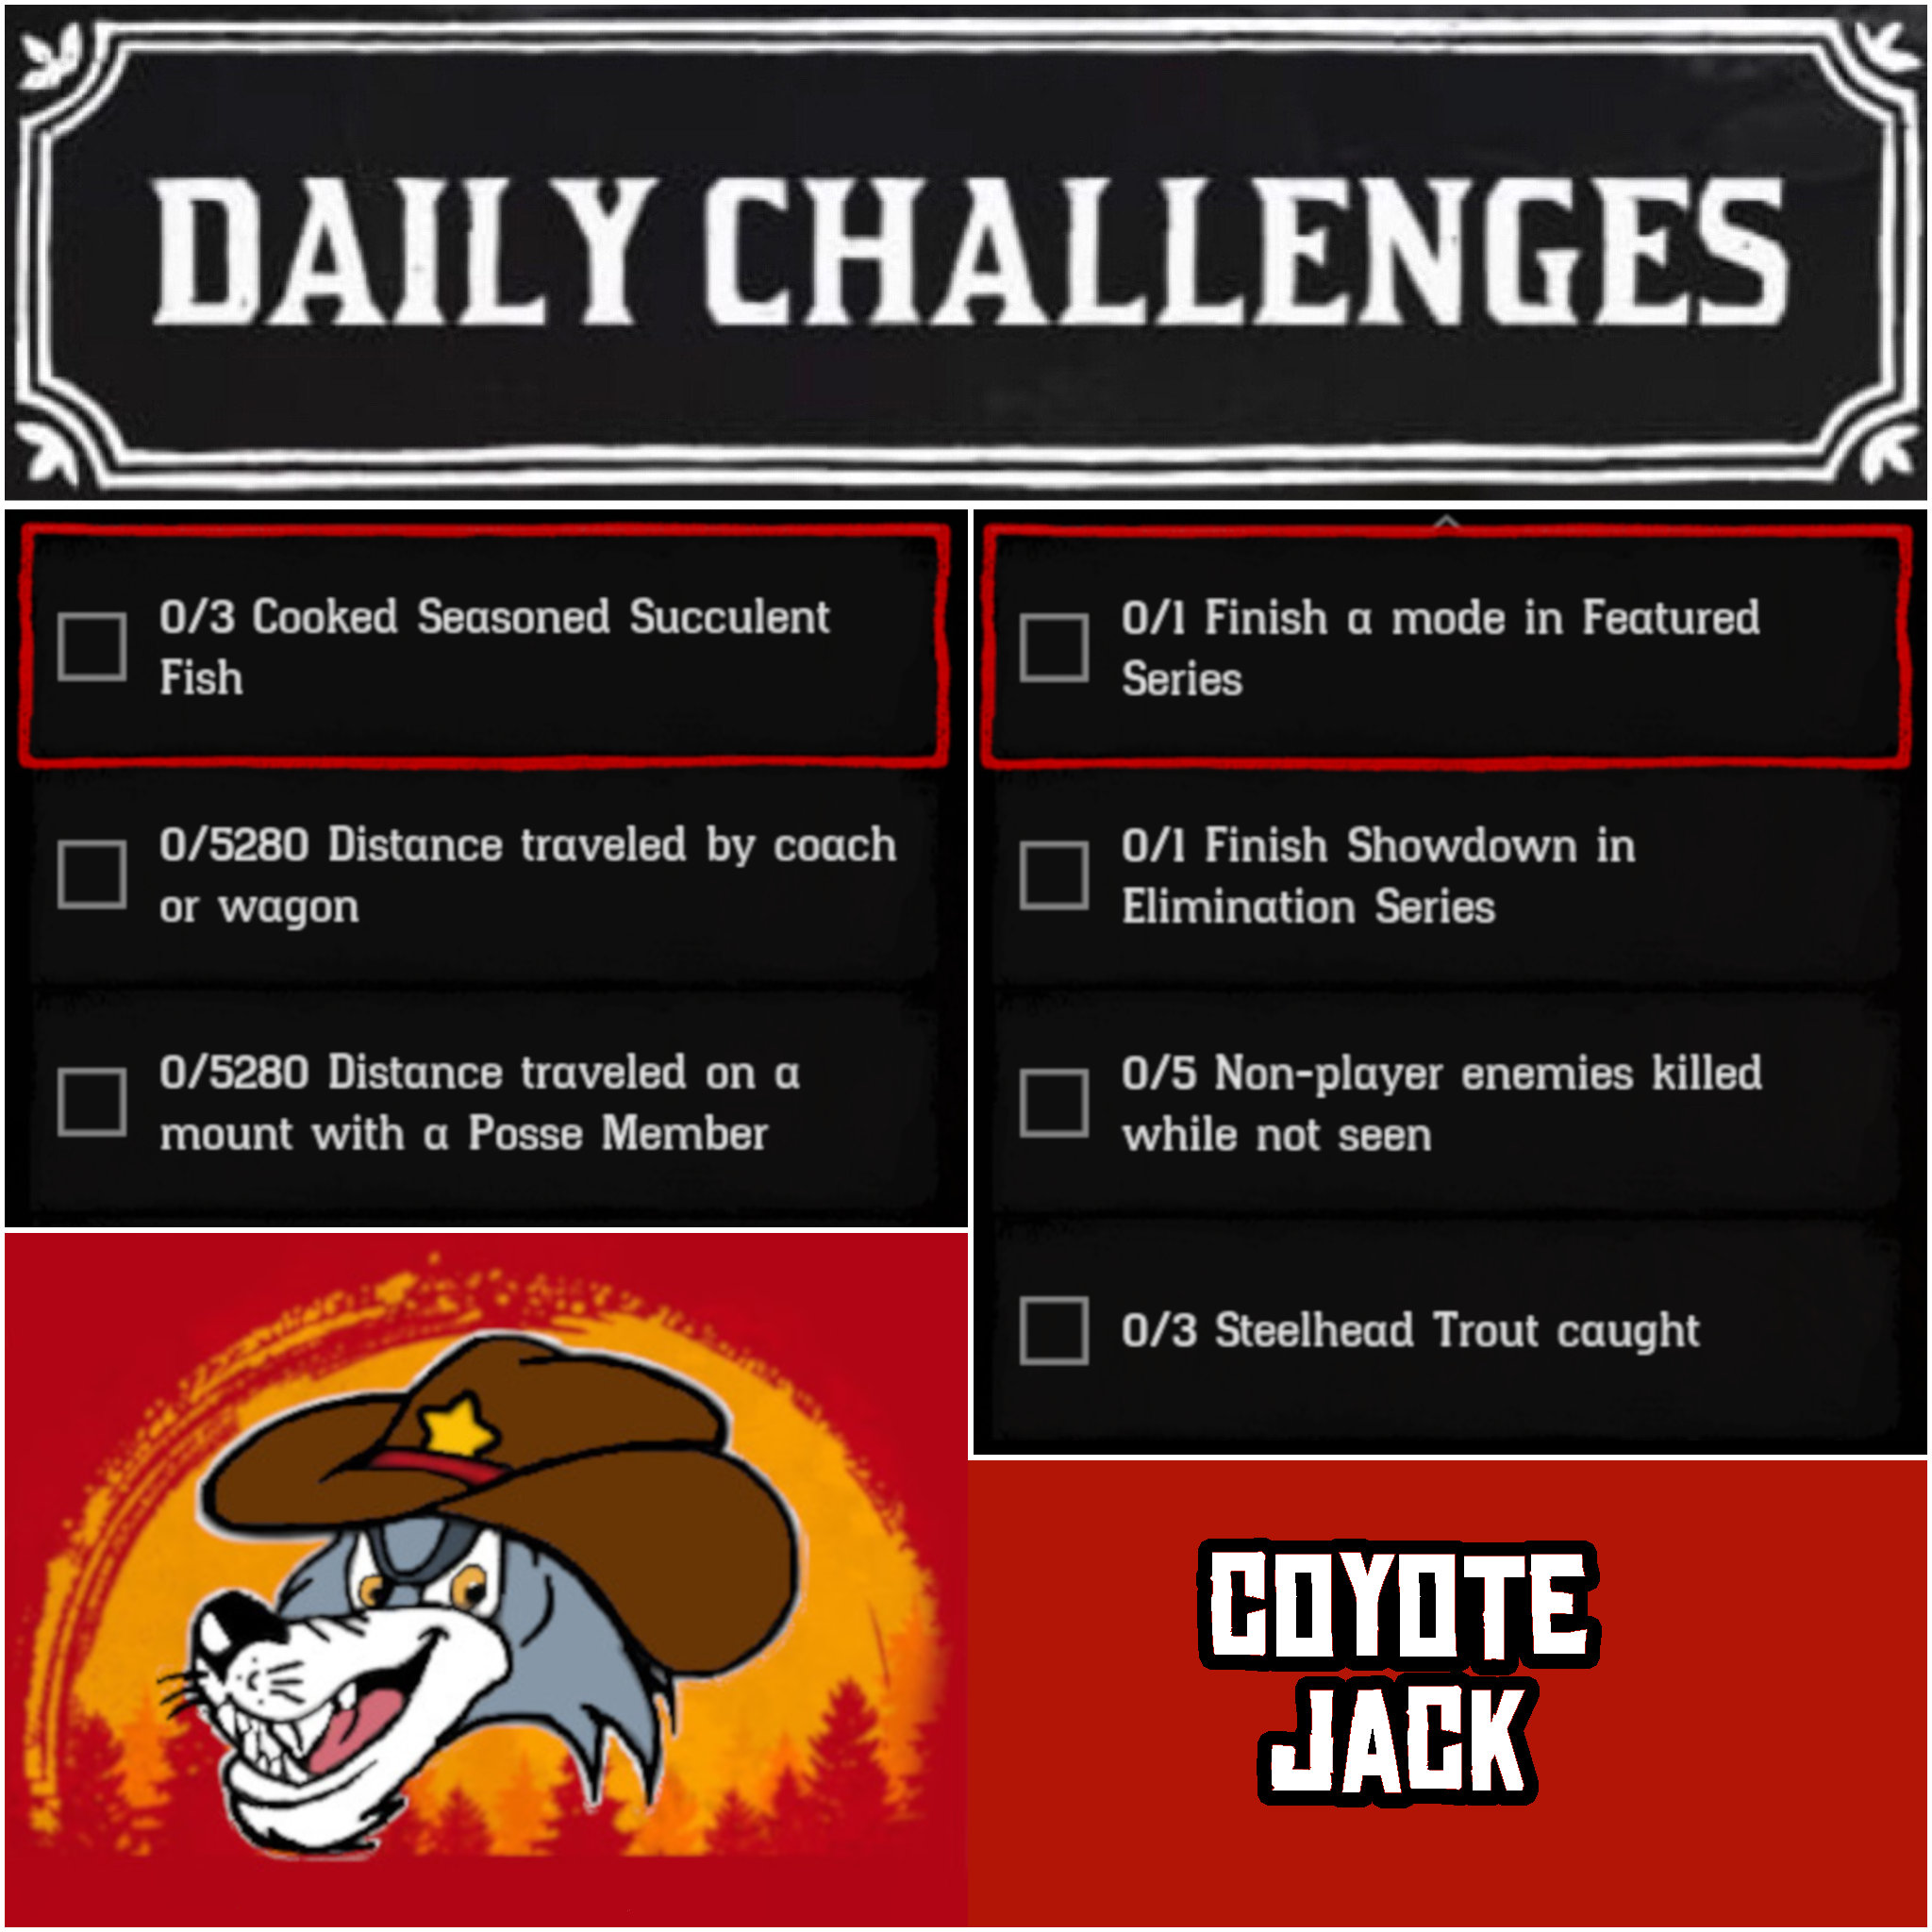 You are currently viewing Saturday 20 February Daily Challenges